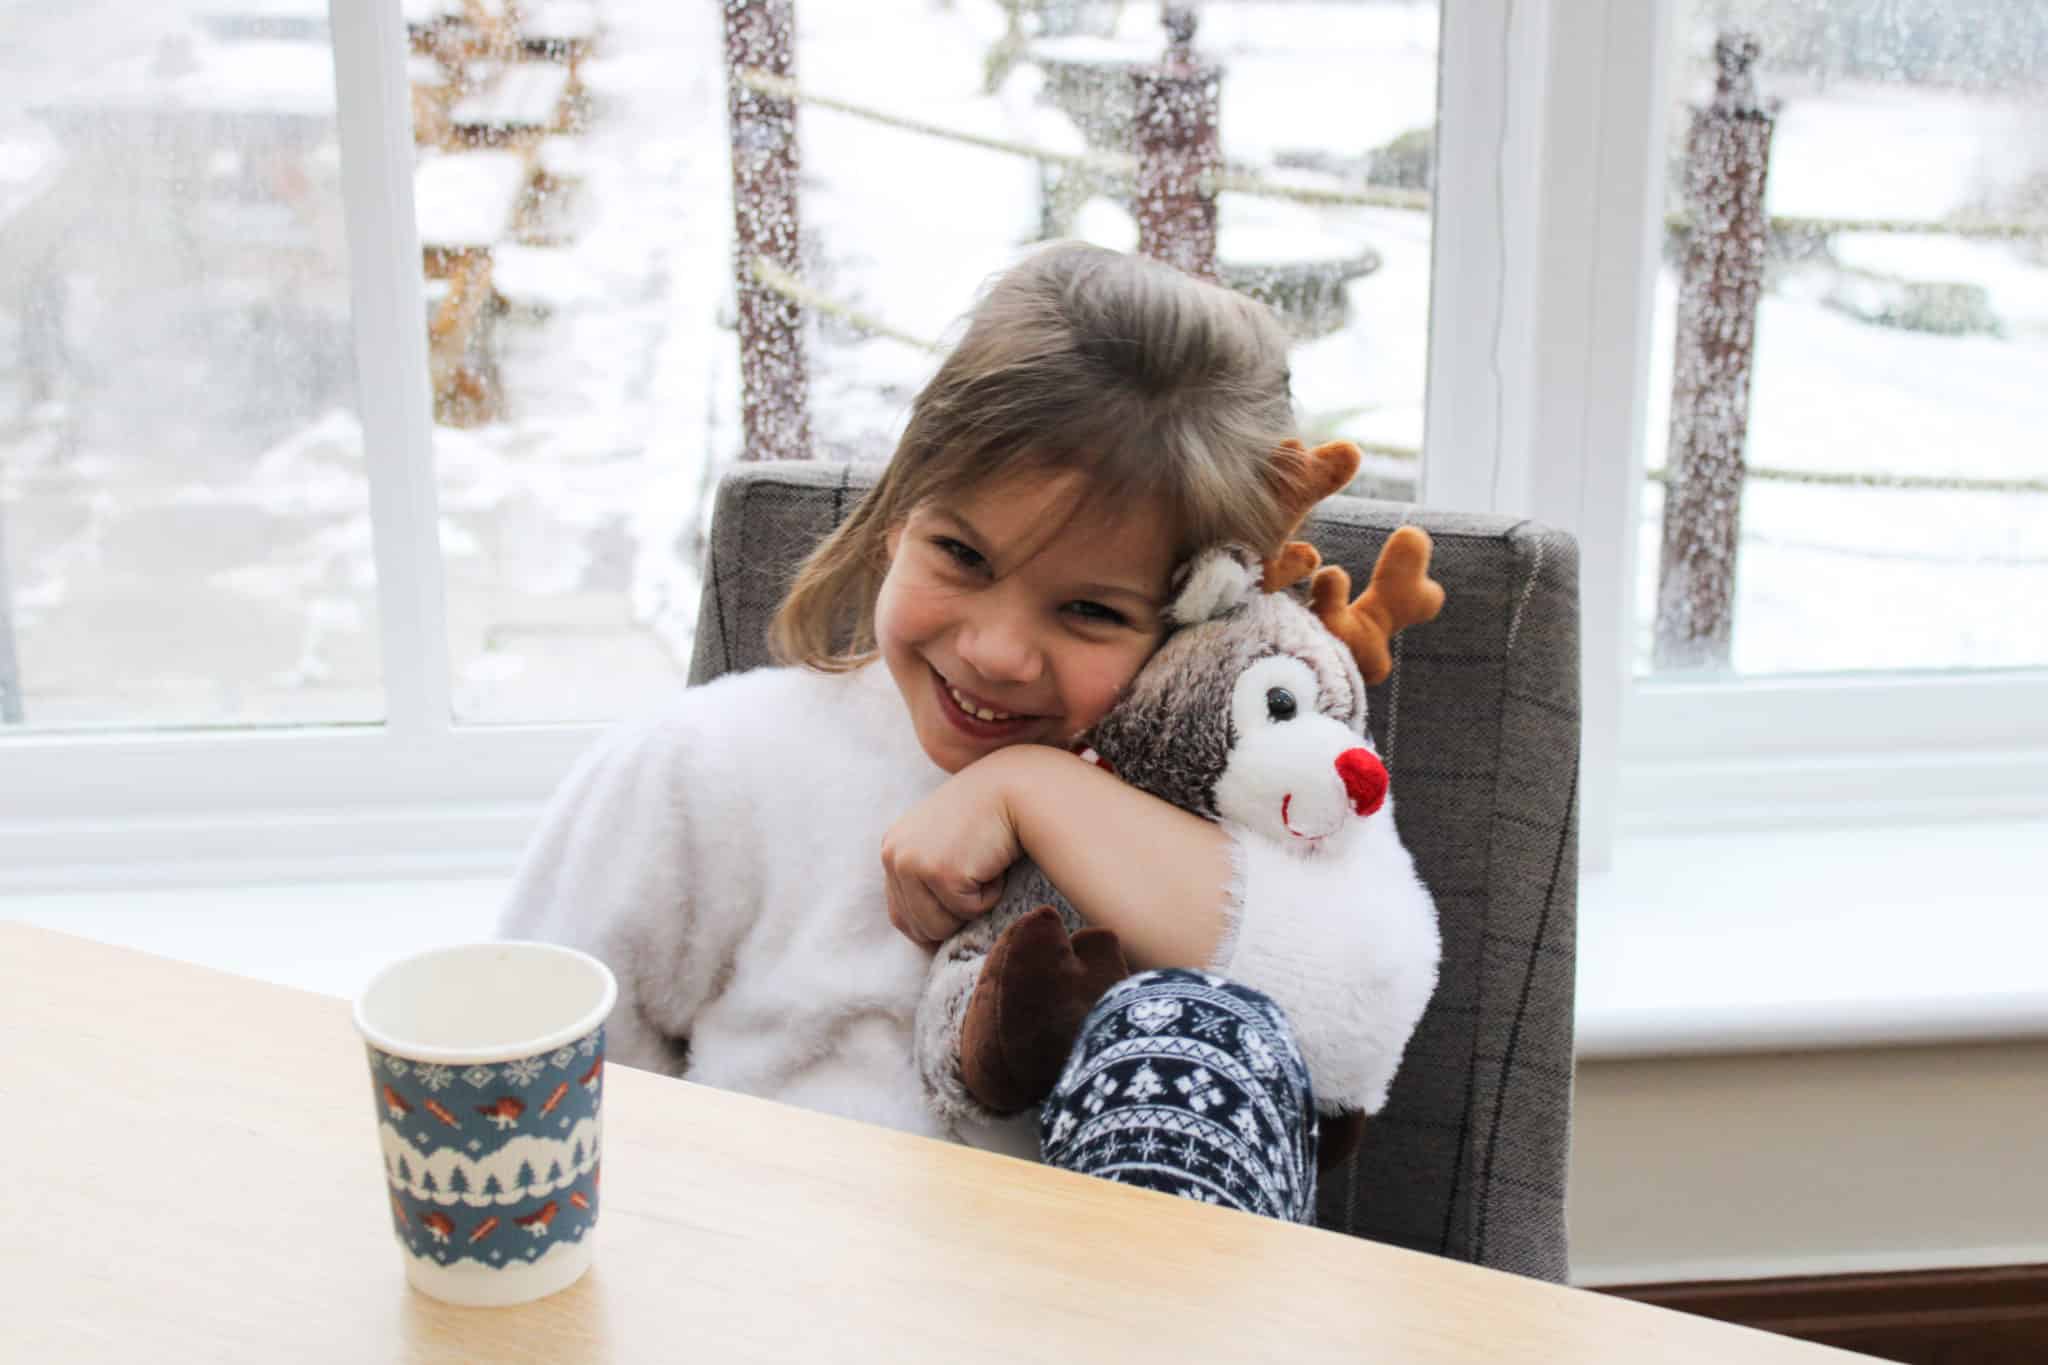 Girl sitting at a table and hugging a reindeer plushie